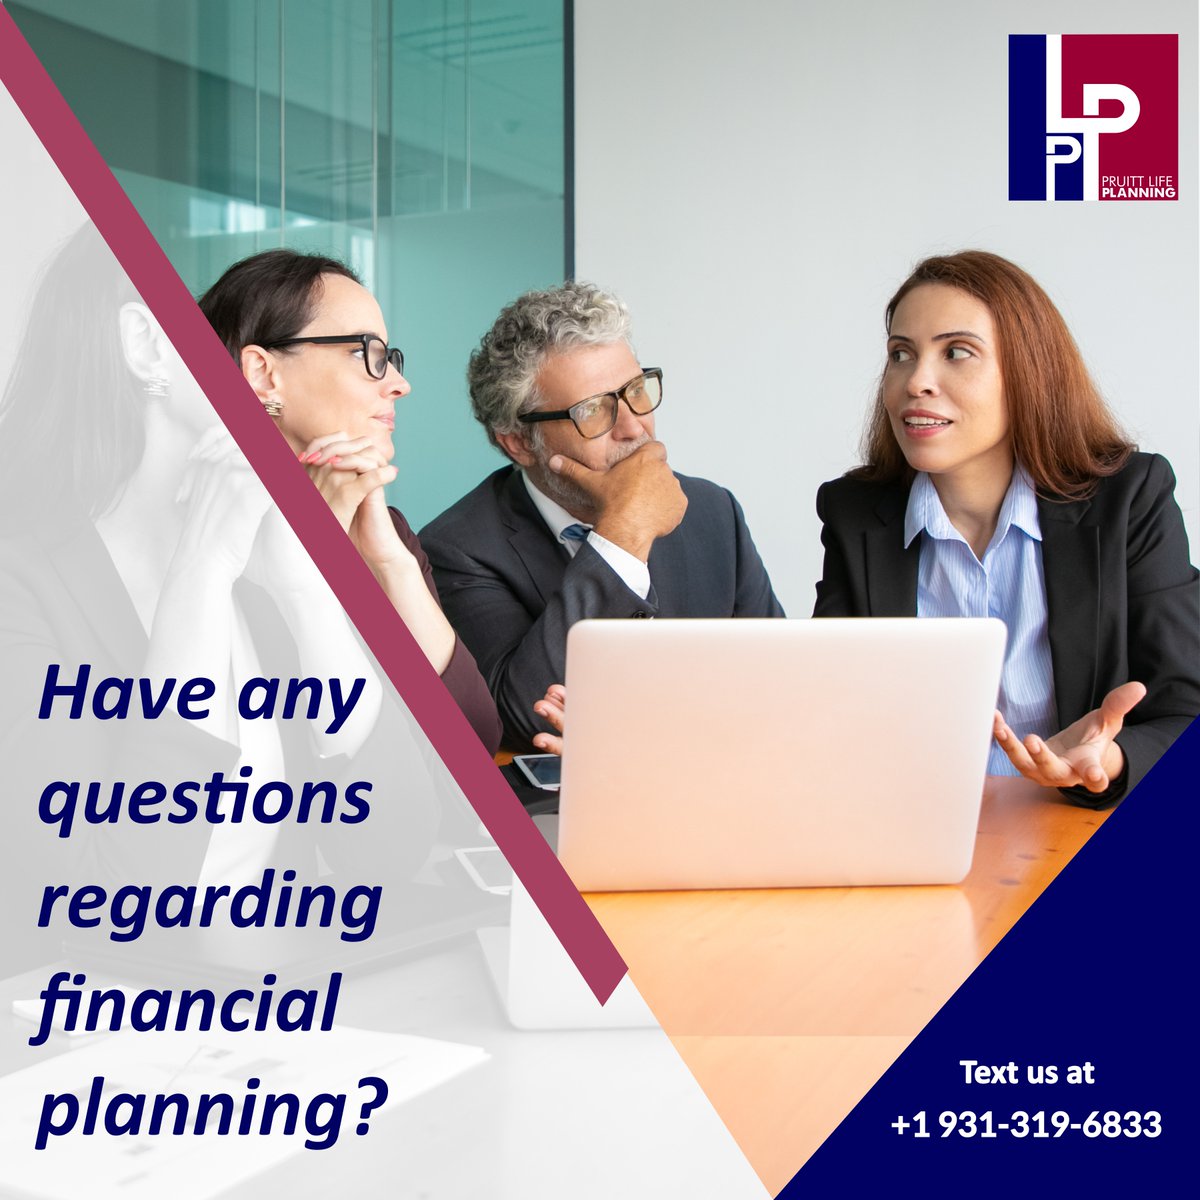 Got financial questions? We got the answers you need to secure your future with confidence. 

Call Us on +1 931-319-6833 to get all the answers!

#PruittLifePlanning #FinancialPlanning #ExpertAdvice #SecureYourFuture #WealthManagement #FinancialFreedom #PlanWithConfidence #AskUs